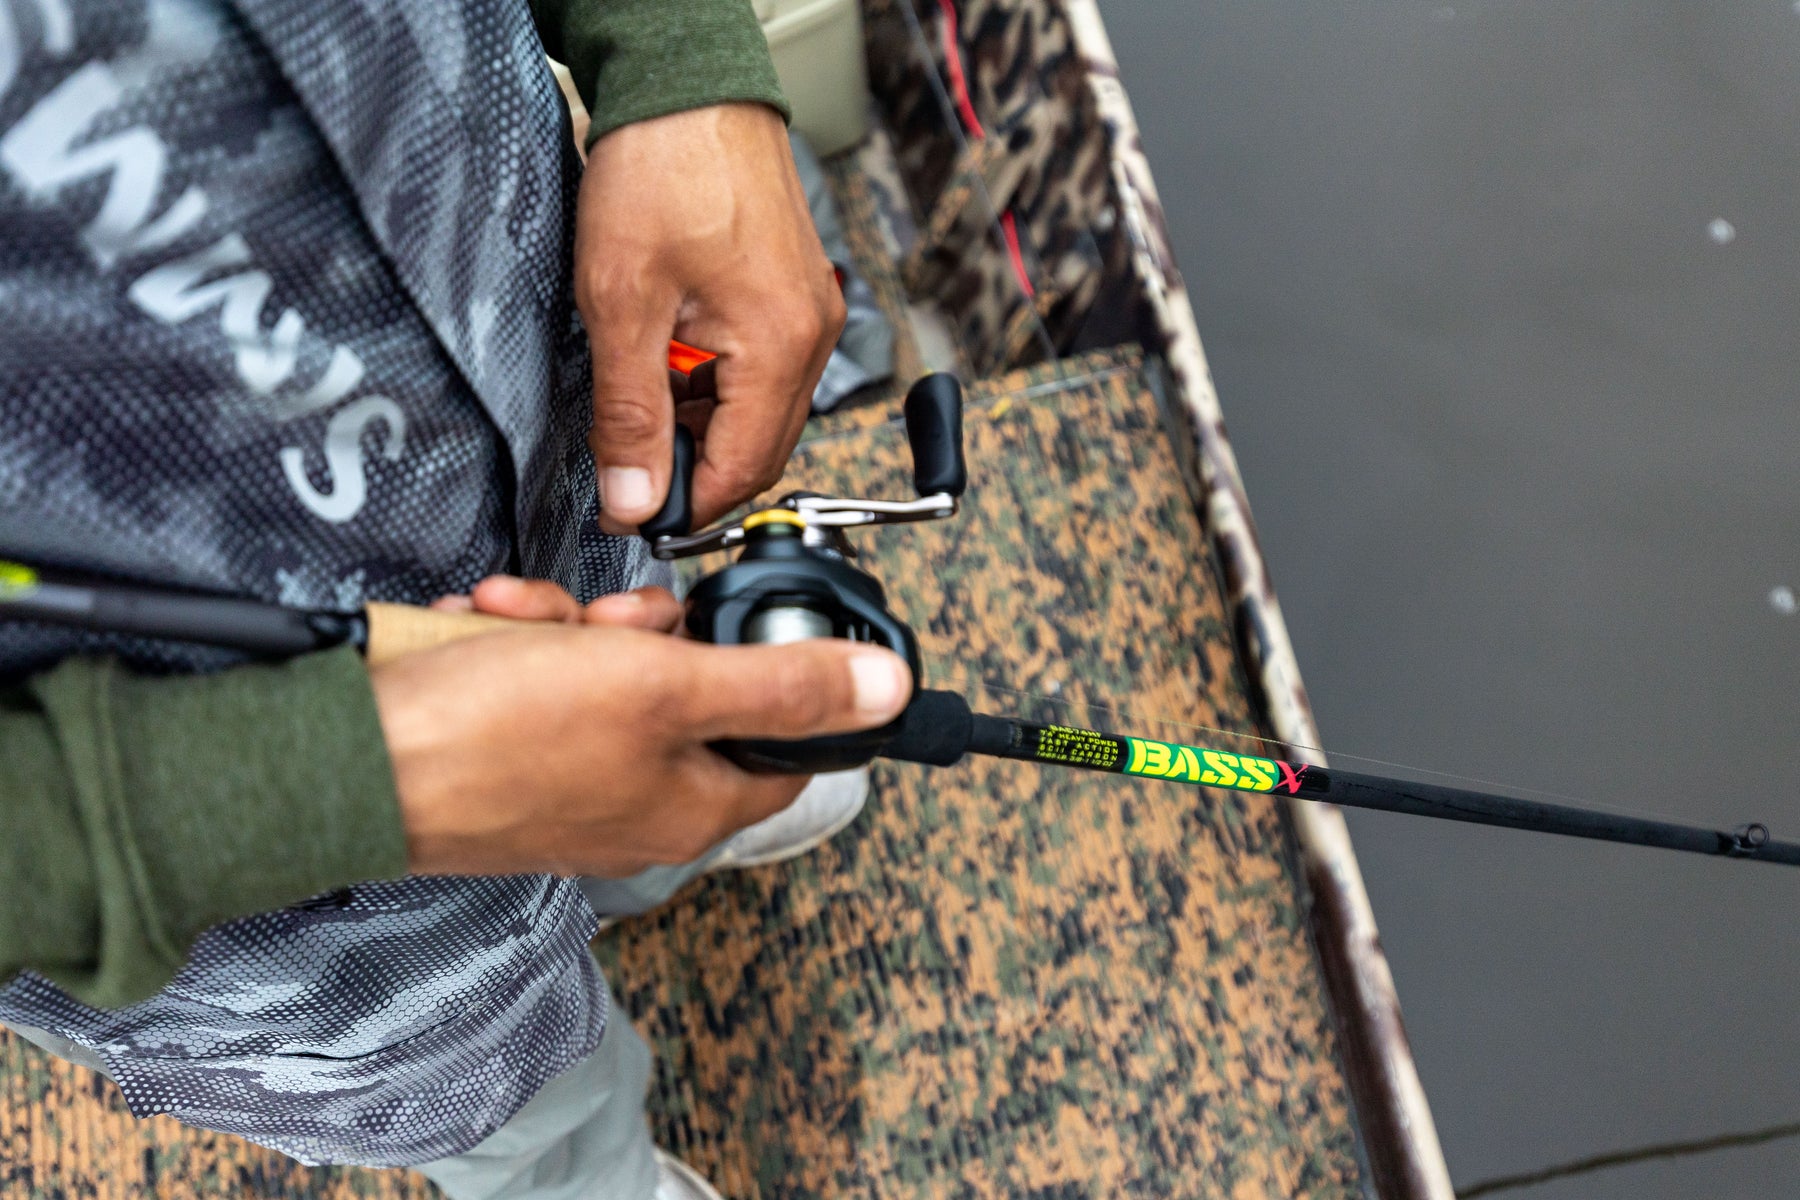 St. Croix Bass X Casting Rods 7'2 Medium Heavy  BACX71MHM - American  Legacy Fishing, G Loomis Superstore